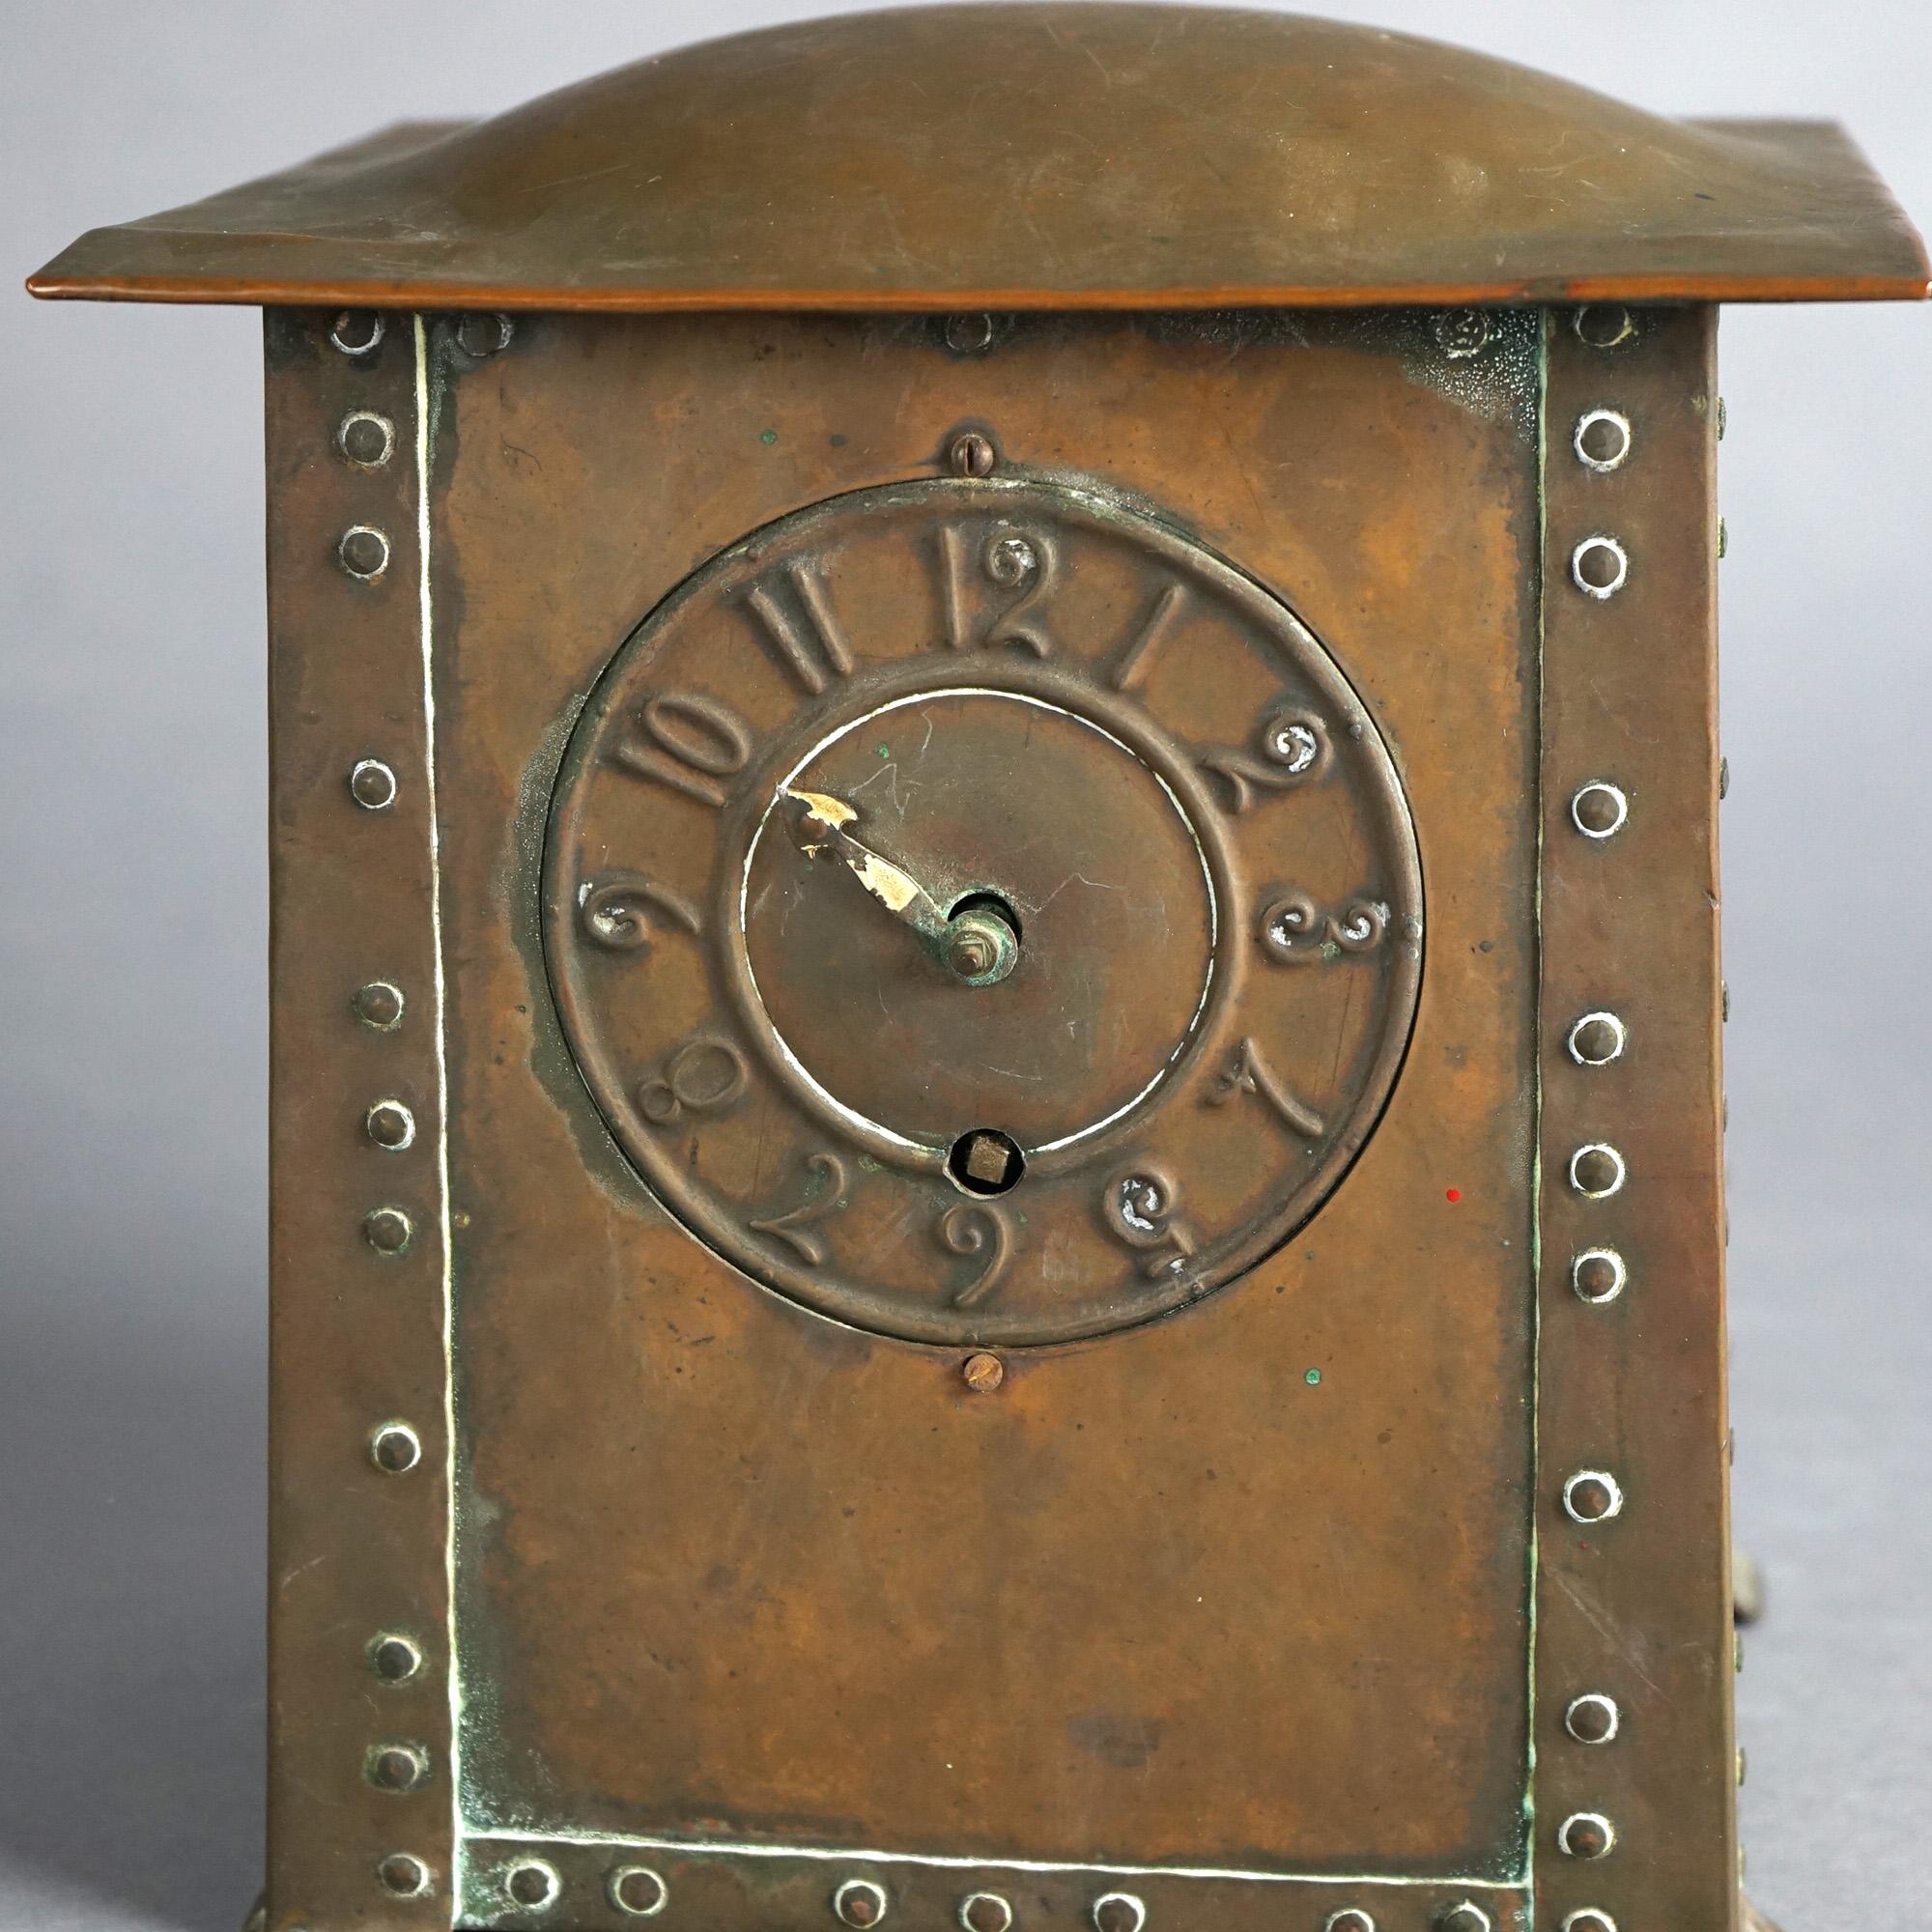 Antique Arts & Crafts Coventry Astral Hammered Copper Mantel Clock C1910

Measures- 9''H x 8''W x 6.75''D